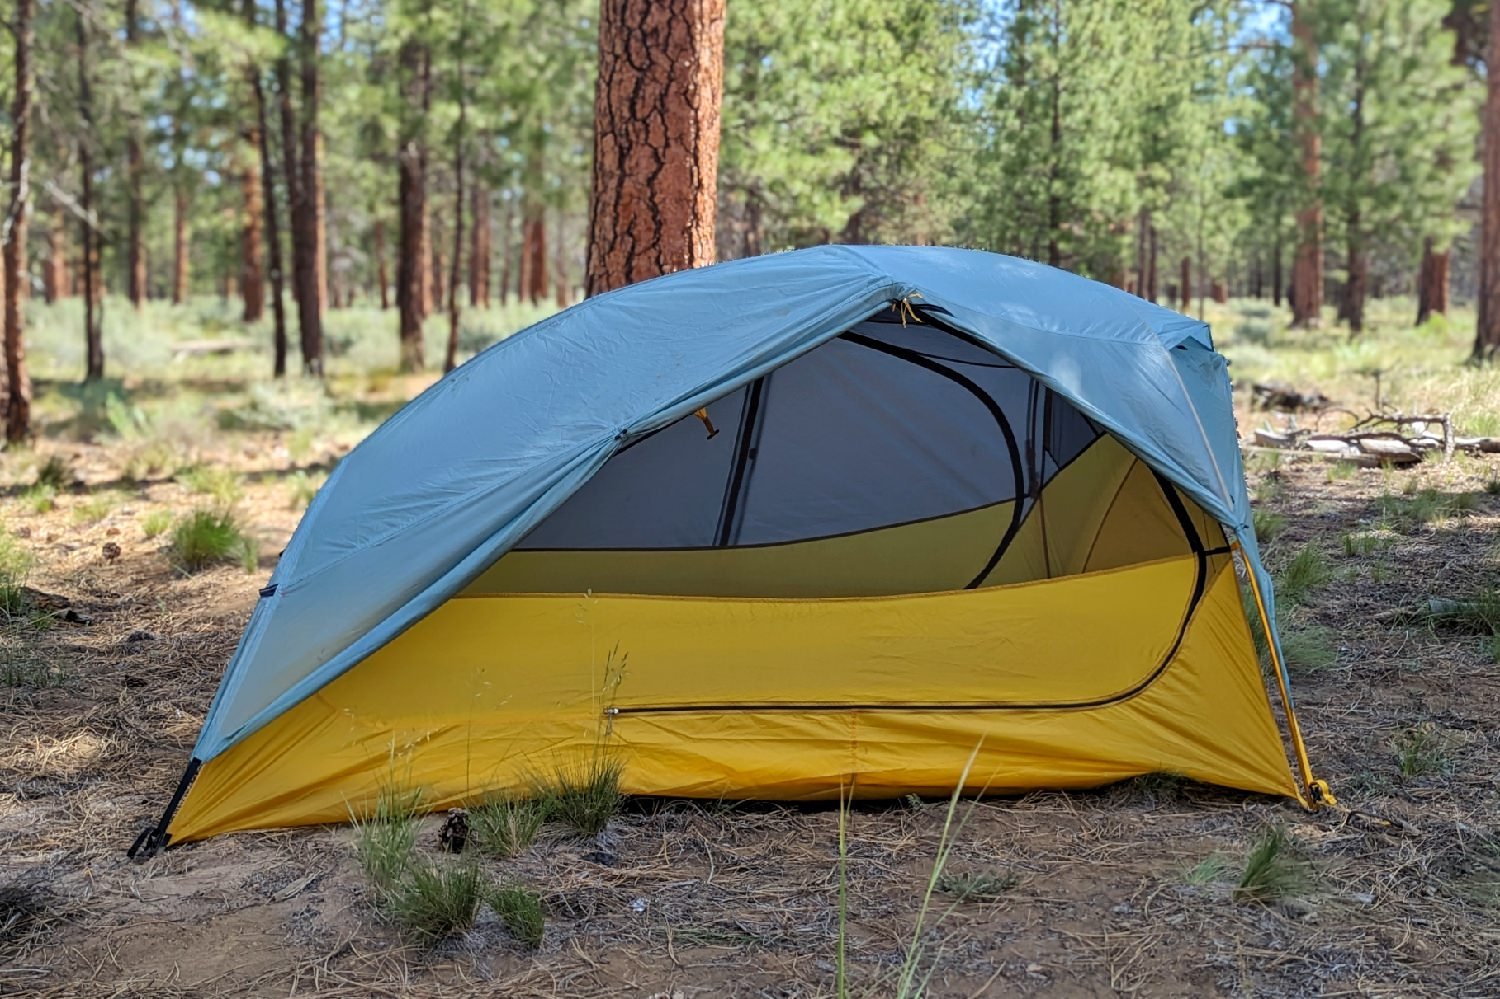 The REI Flash 2 Tent set up in a forest campsite with the rainfly on - both sides of the vestibule are rolled back